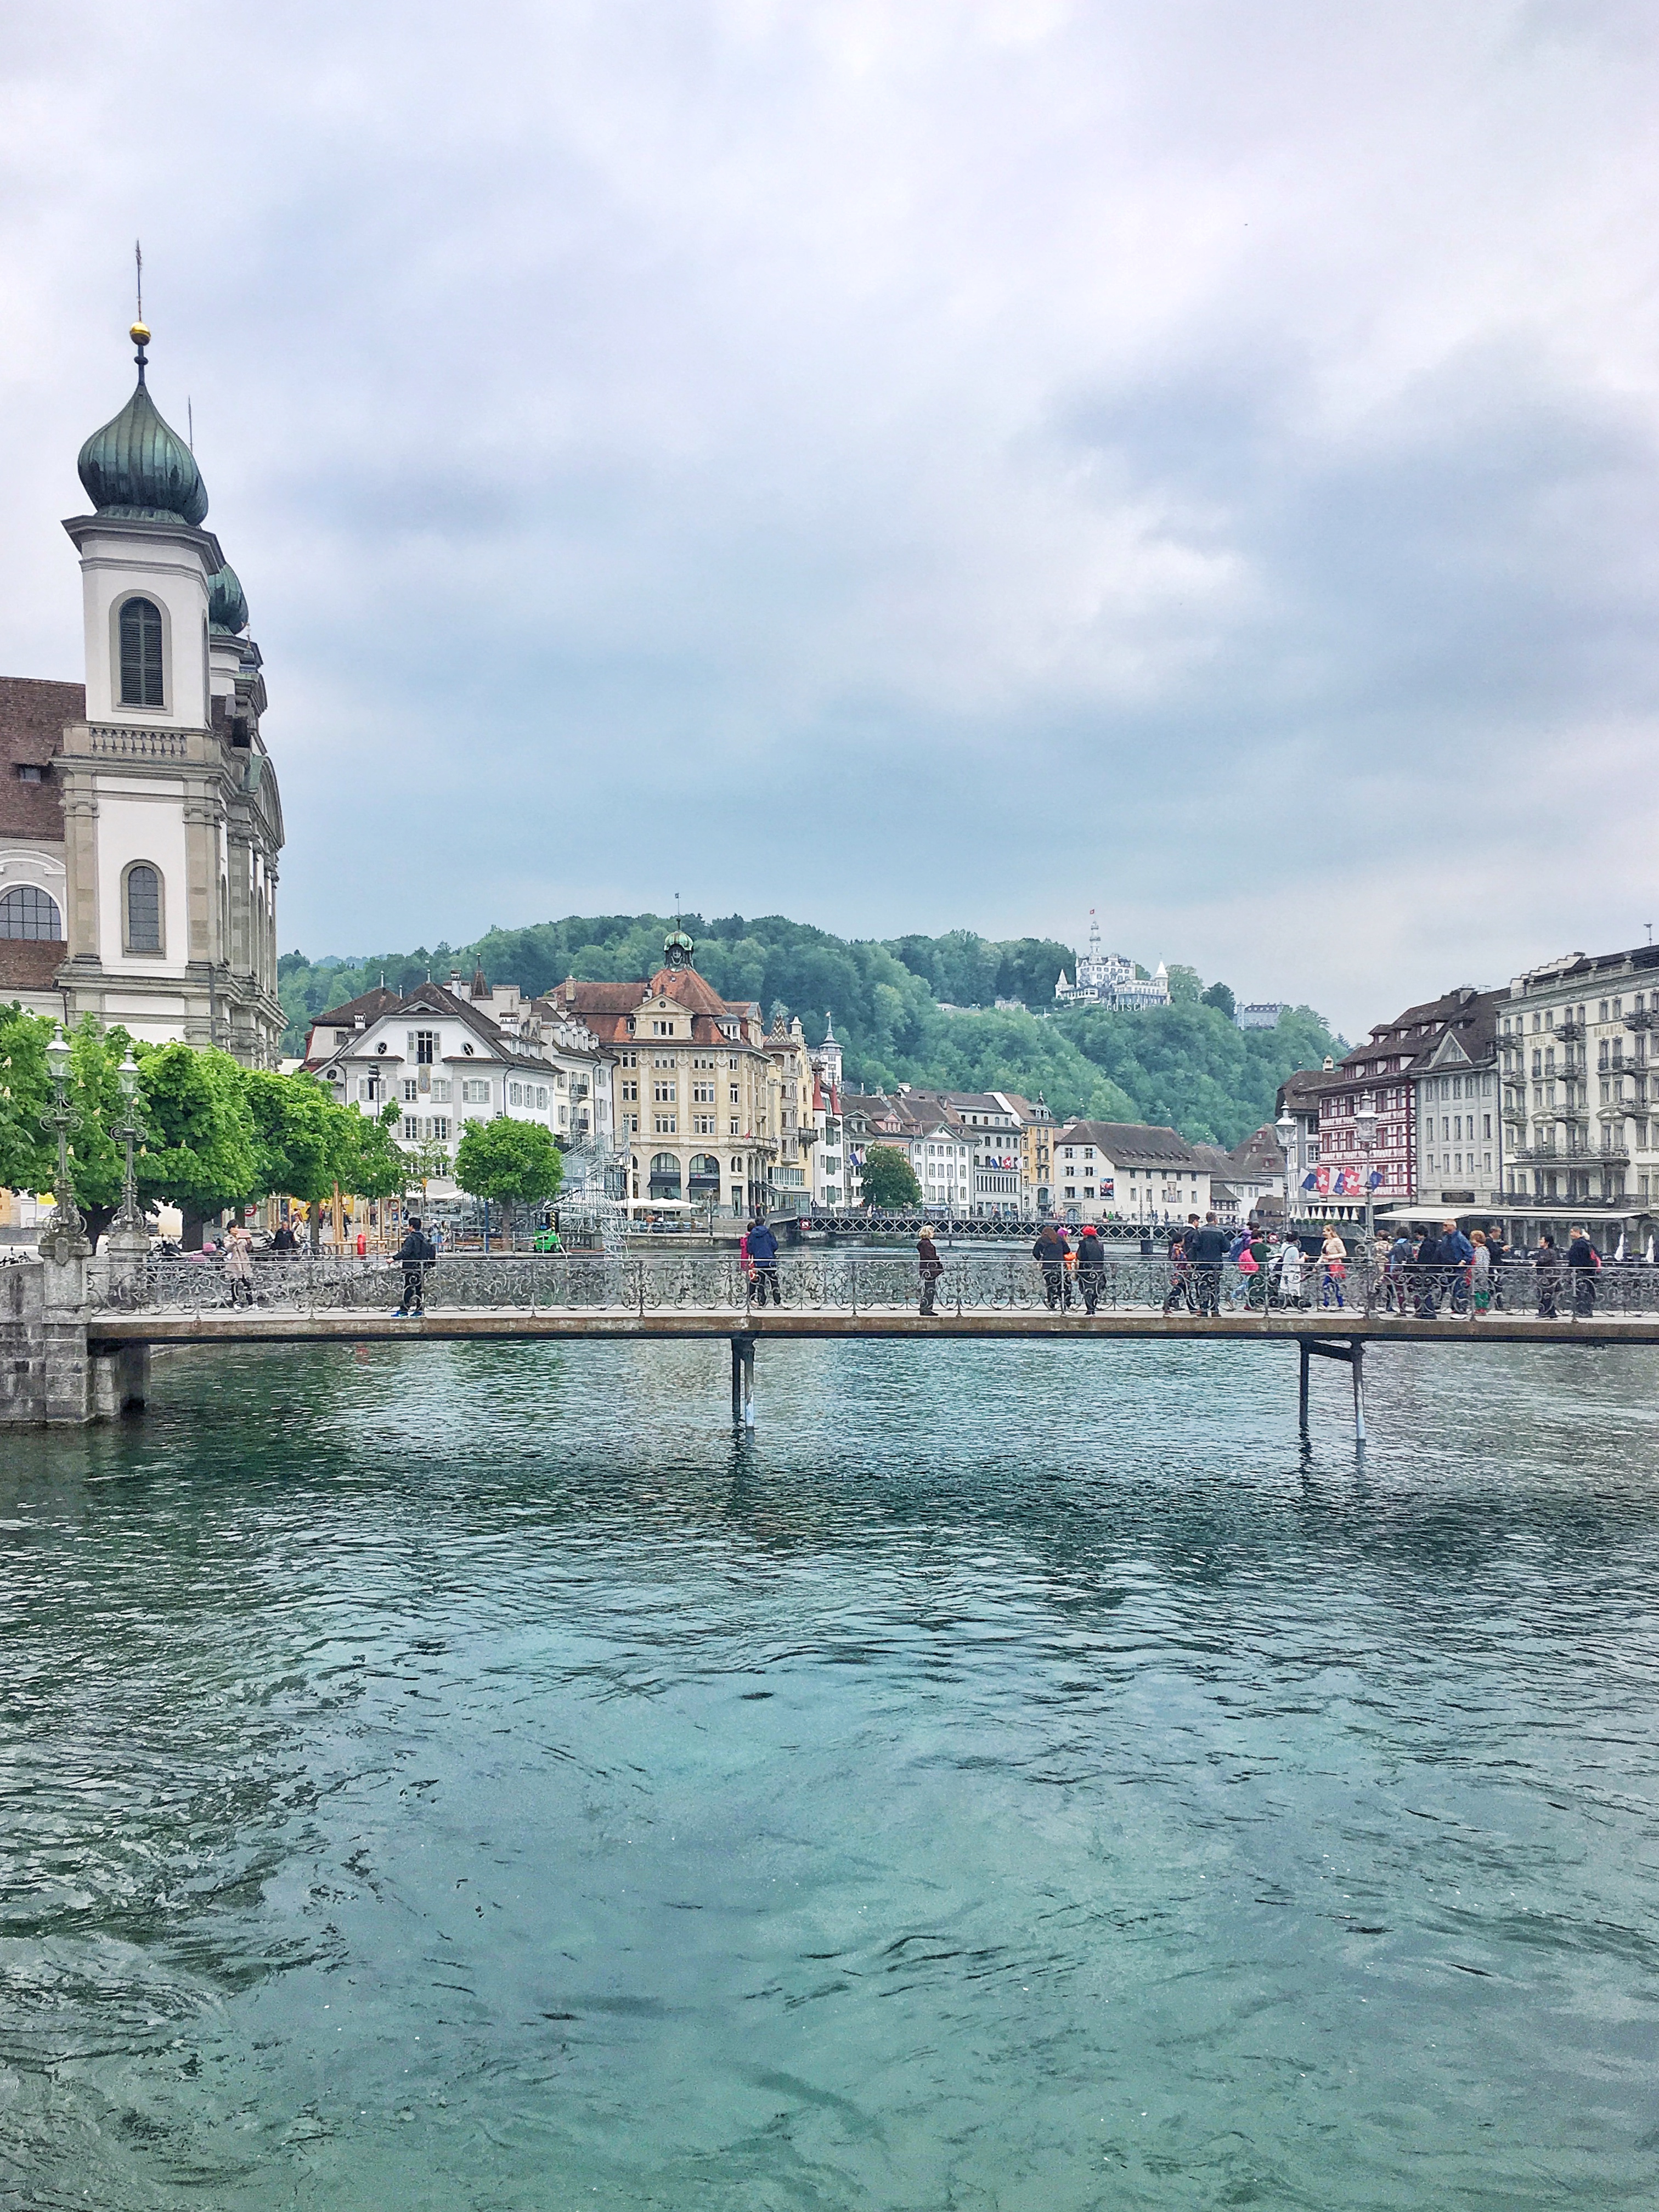 Turquoise waters of Lucerne